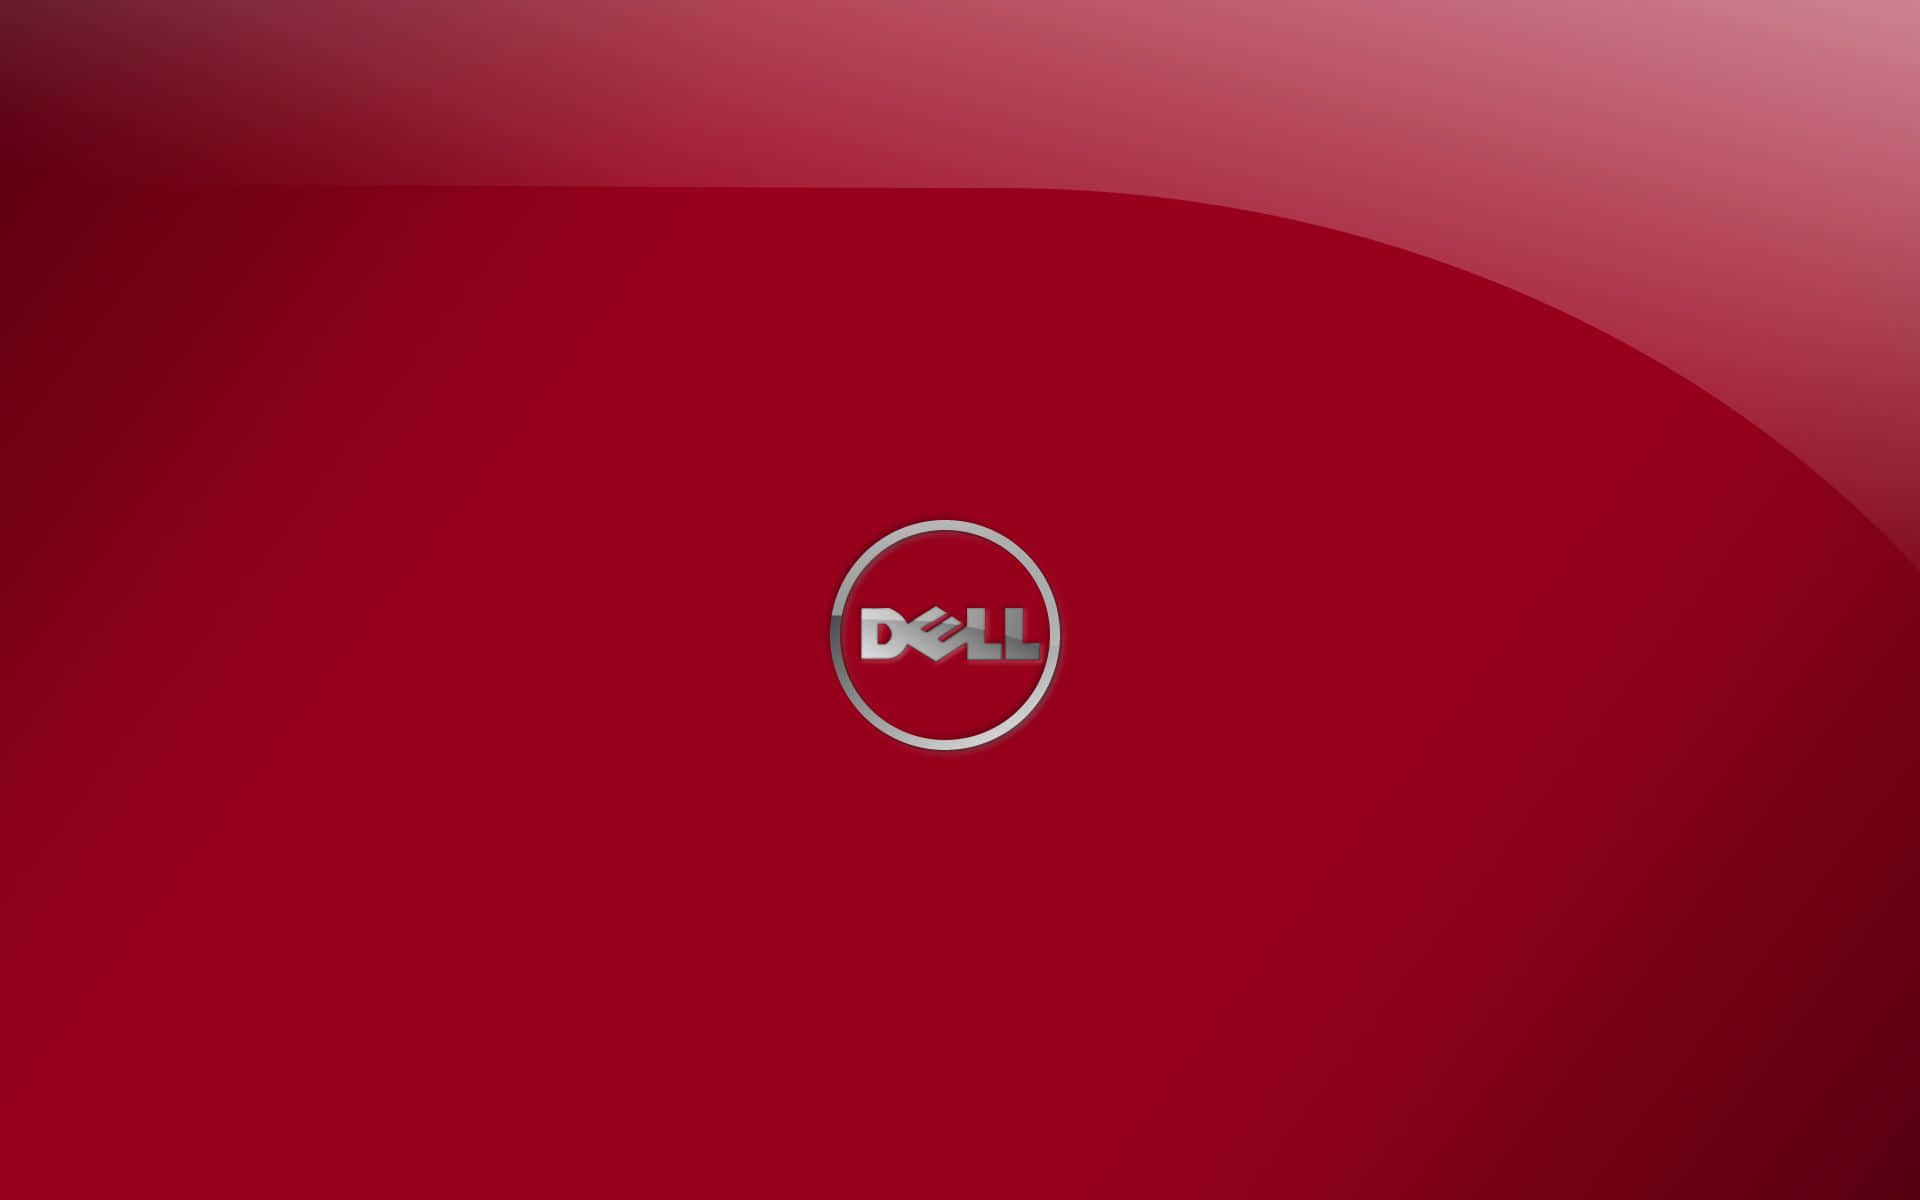 Get a powerful&reliable Dell computer to stay productive